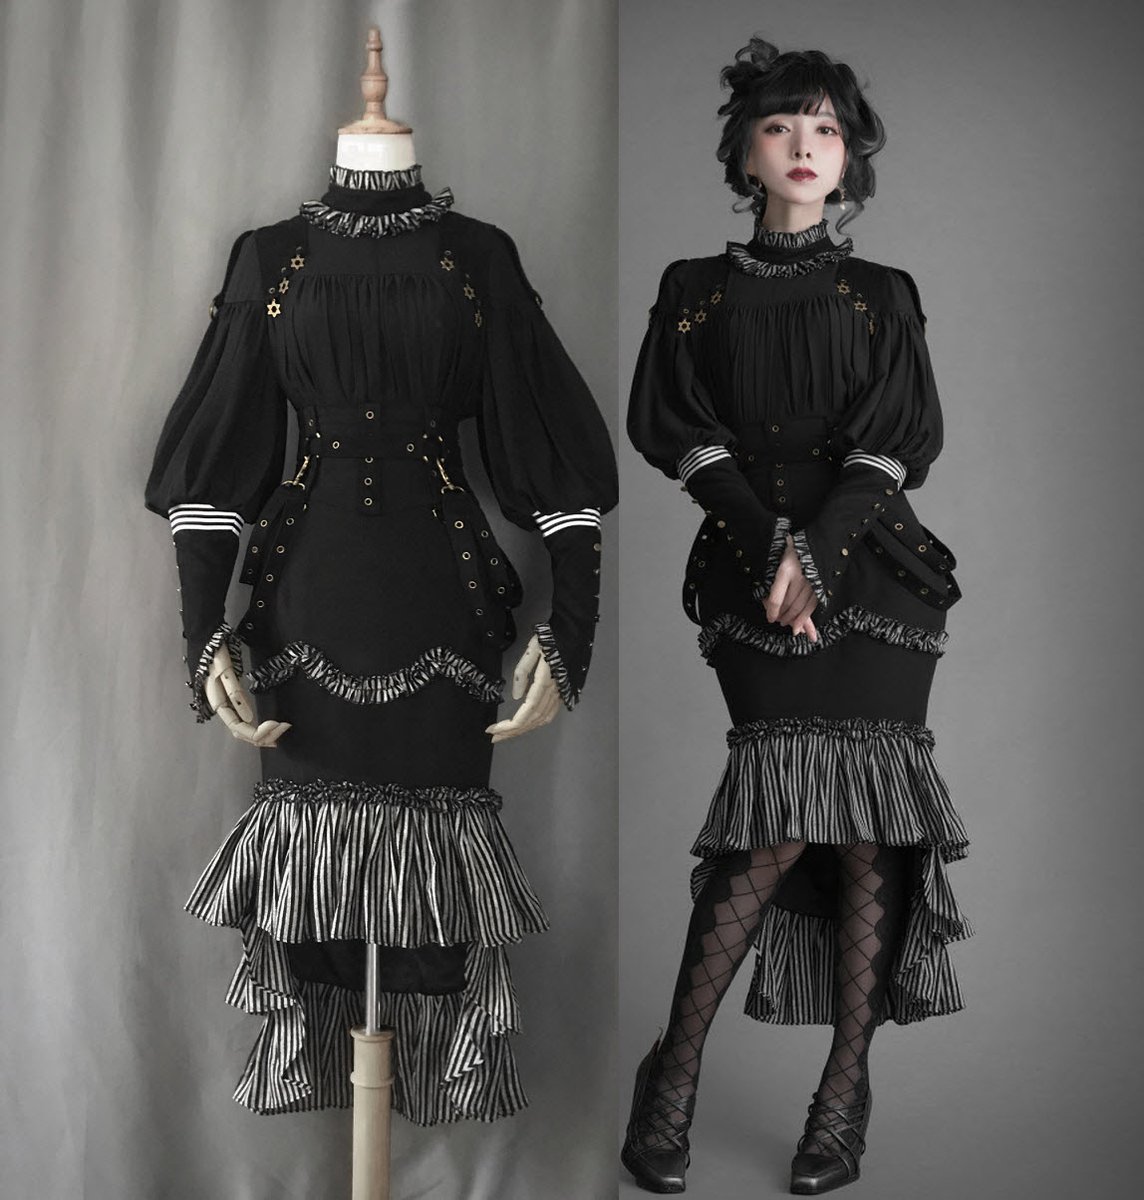 【-The Dark Side of Olleyanna-】 #GothicLolita Blouse and Skirt in Full Sizes Are Available Now!!!

◆ Shopping Link >>> lolitawardrobe.com/the-dark-side-…
◆ Limited Quantity!!!